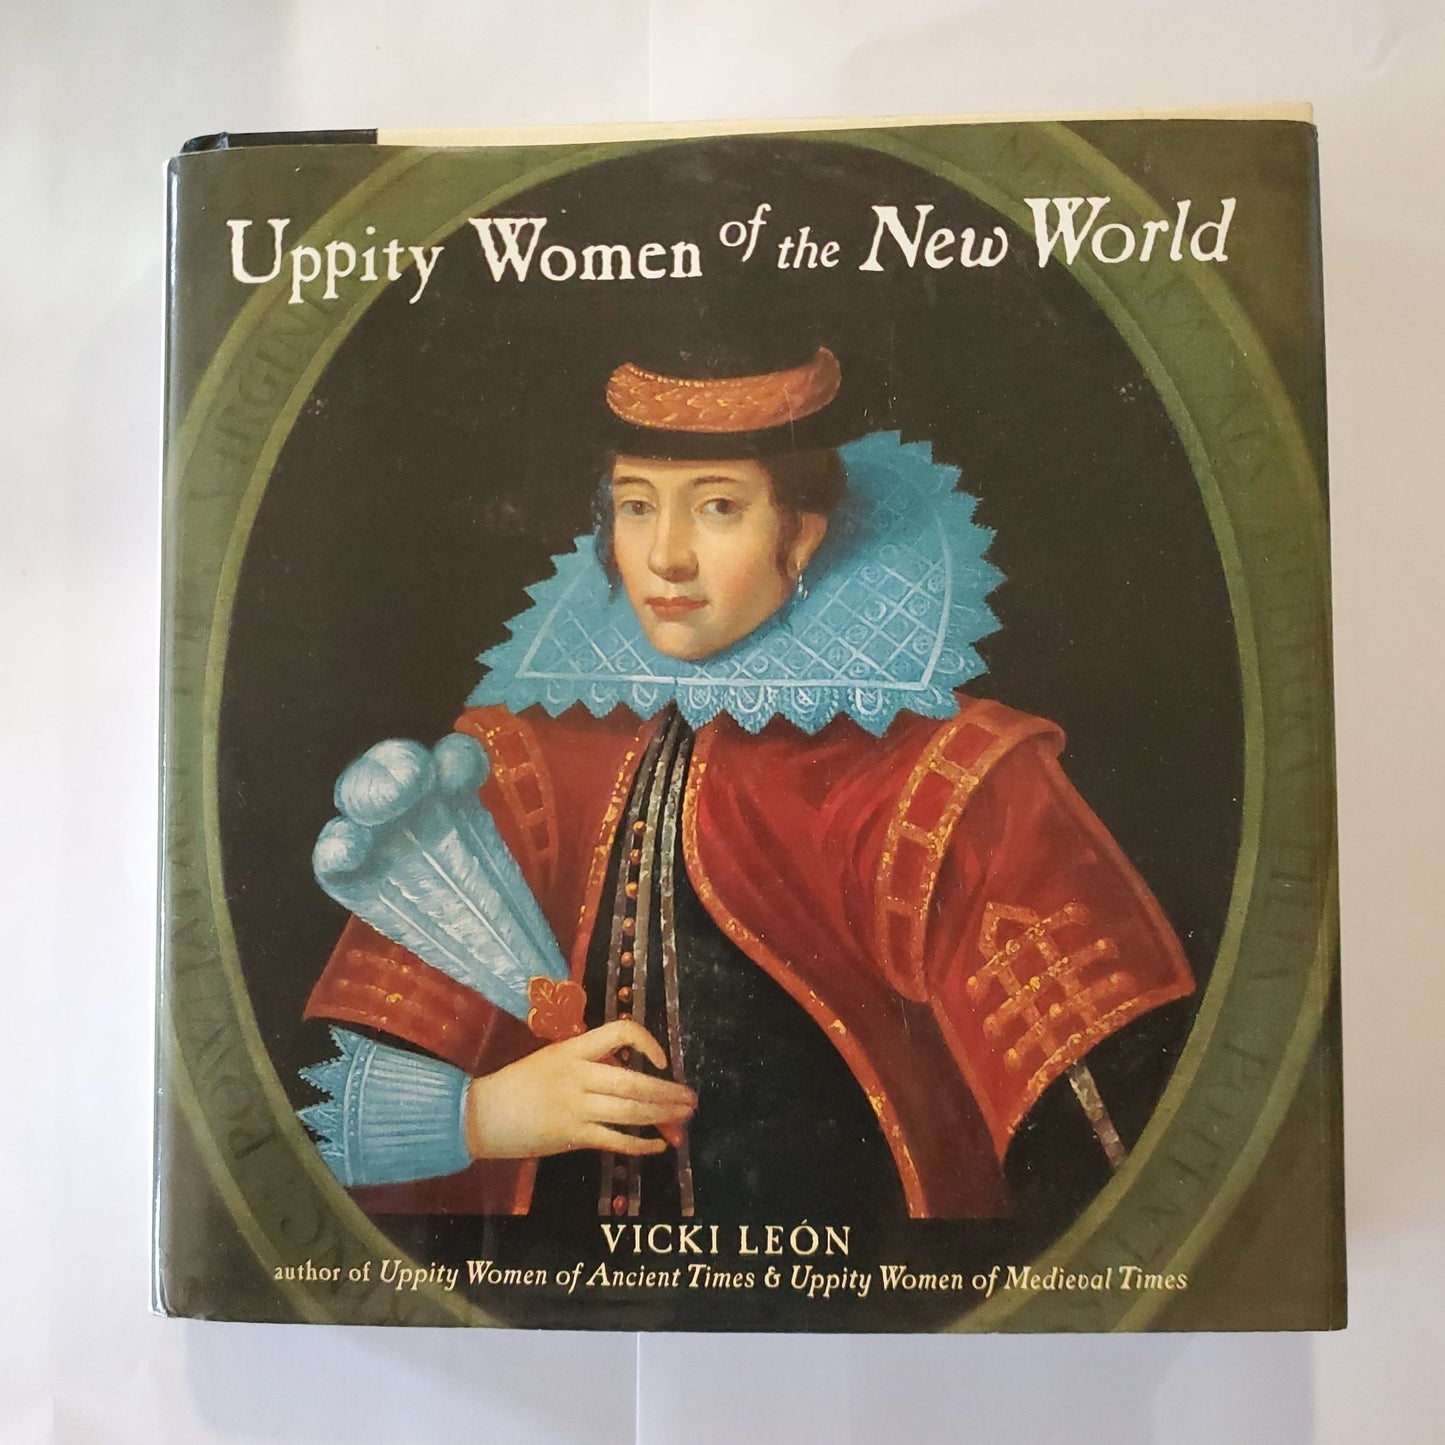 Uppity Women of the New World - [ash-ling] Booksellers